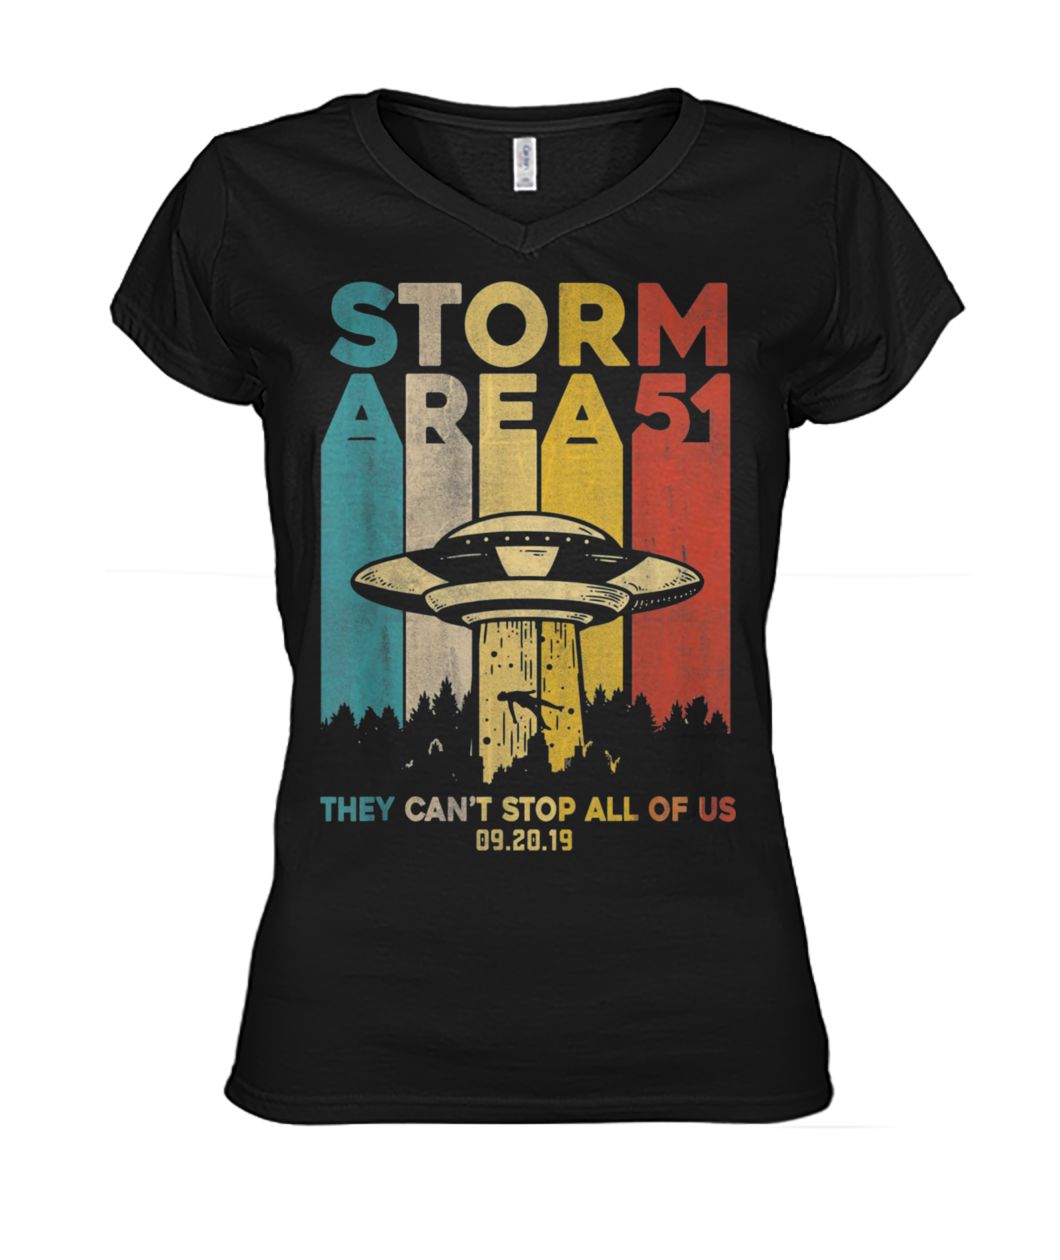 Storm area 51 alien ufo they cant stop us vintage women's v-neck